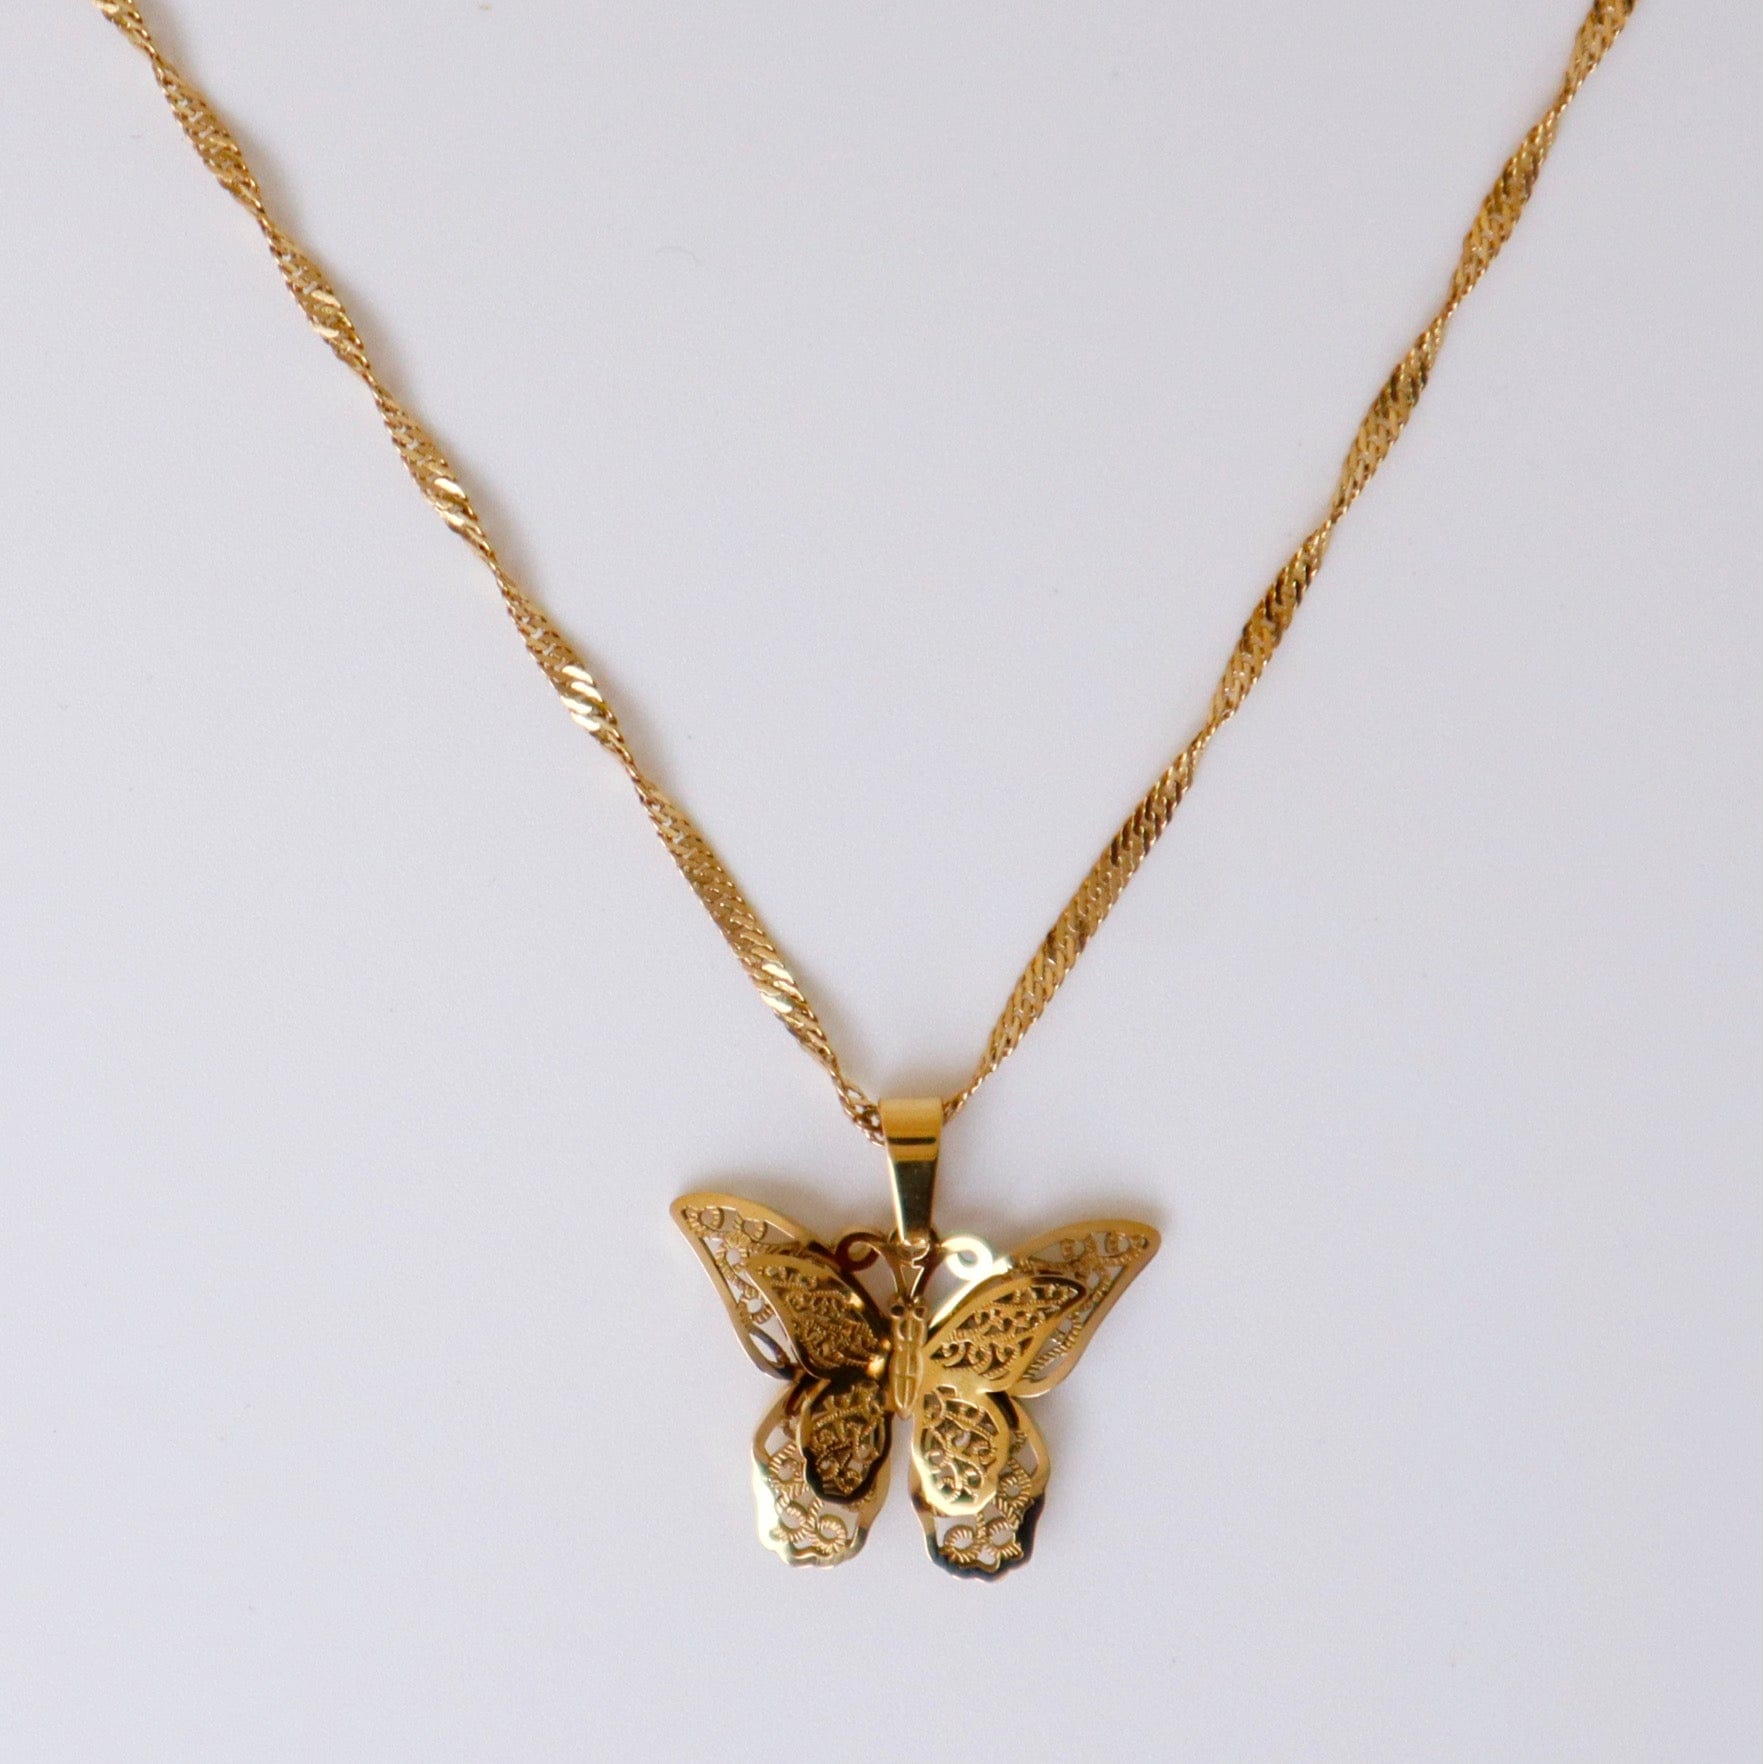 ENCHANTED BUTTERFLY NECKLACE | Sweetheart necklaces, Butterfly necklace gold,  Necklace